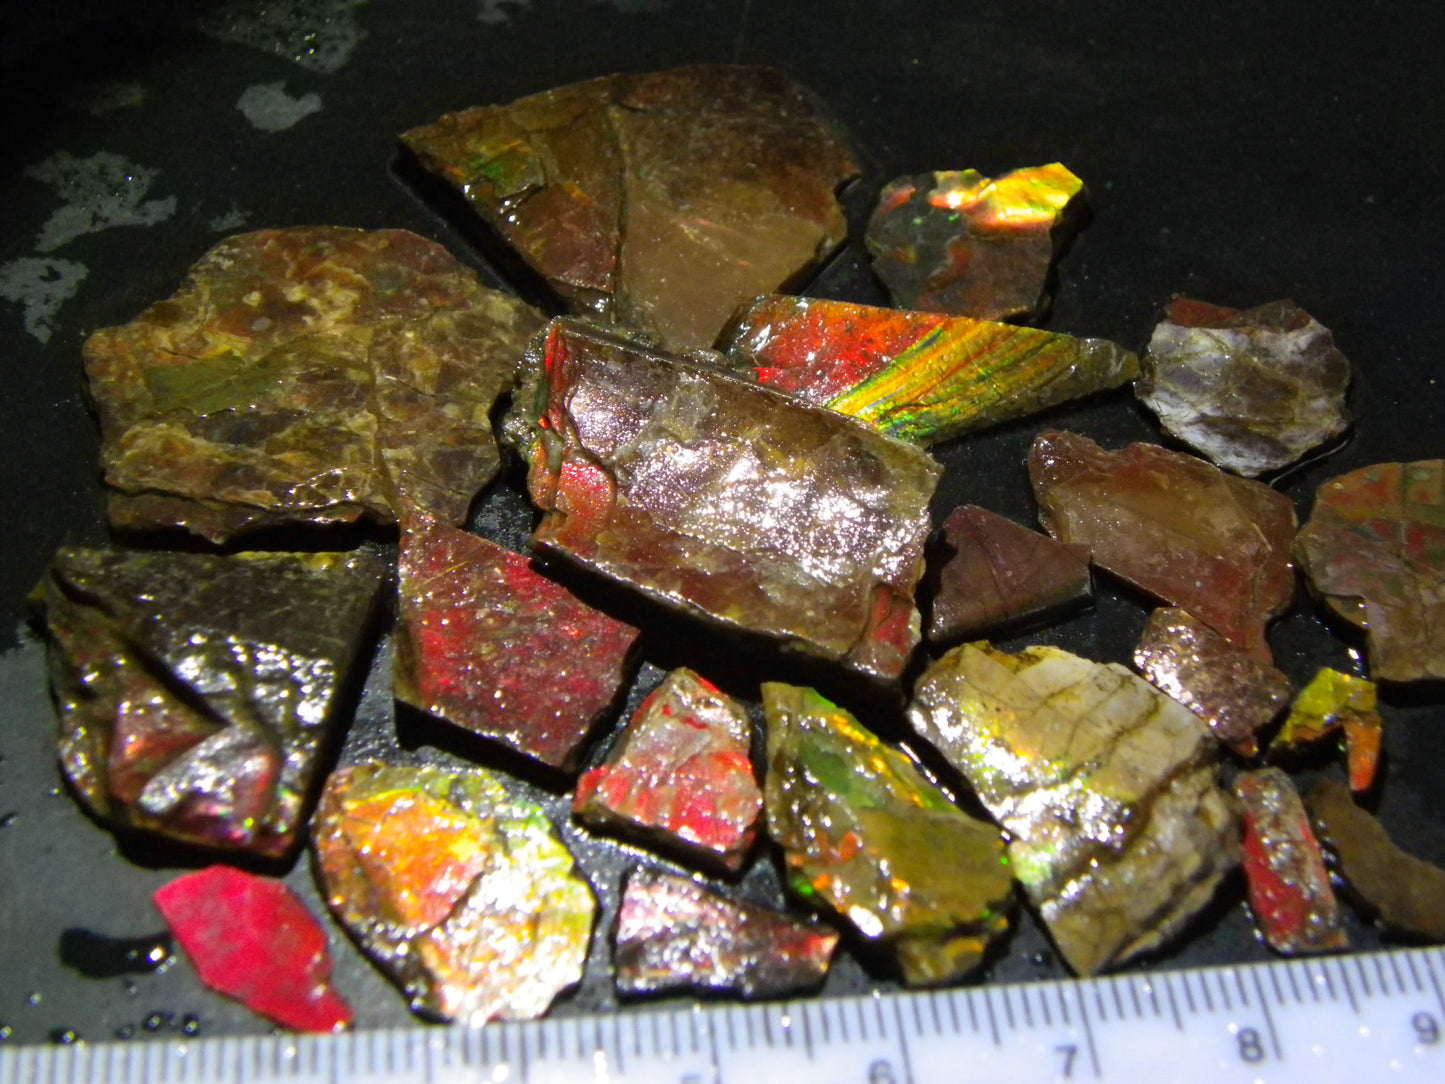 Nice Rough Ammolite Parcel 105cts Multicolours Alberta Canada :) Red/Greens